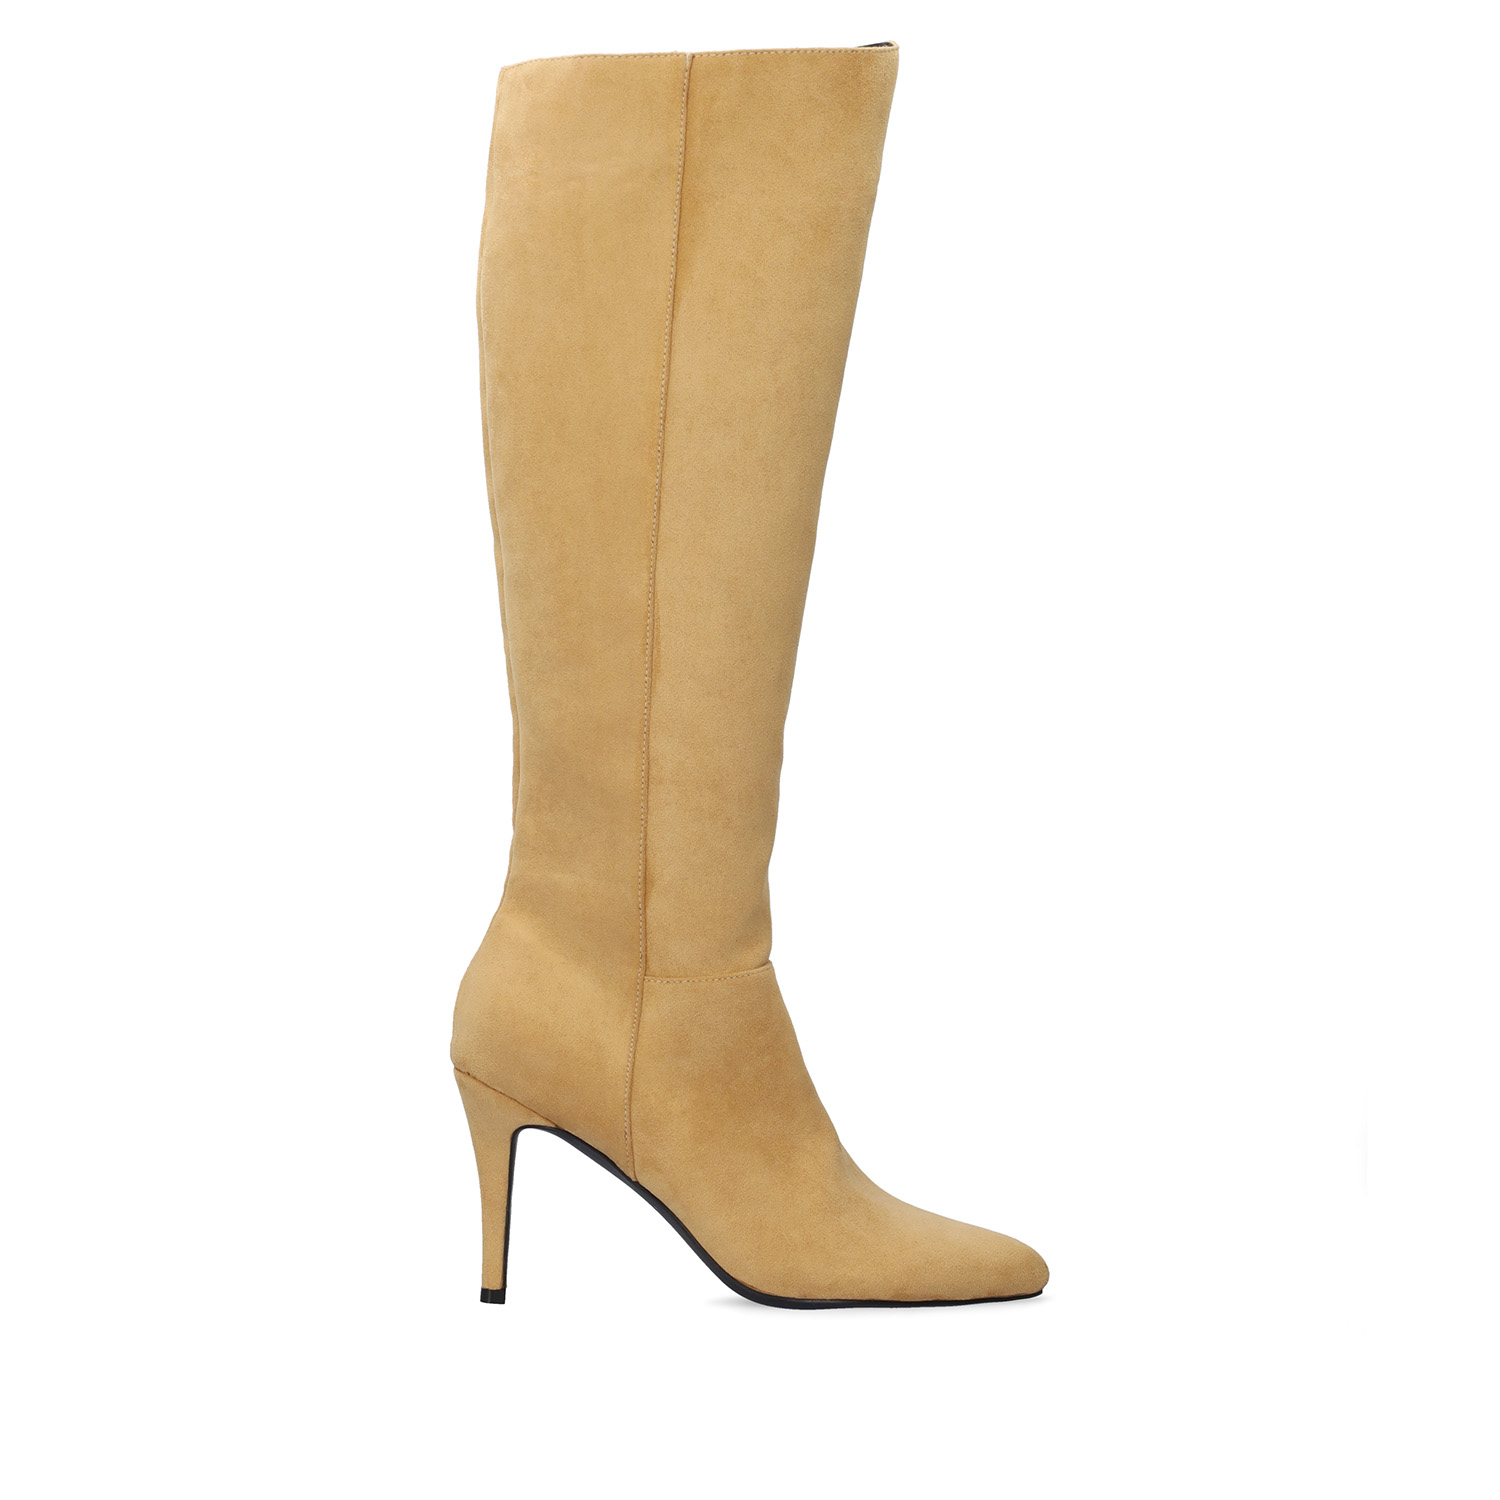 High-Calf boots in beige faux suede 